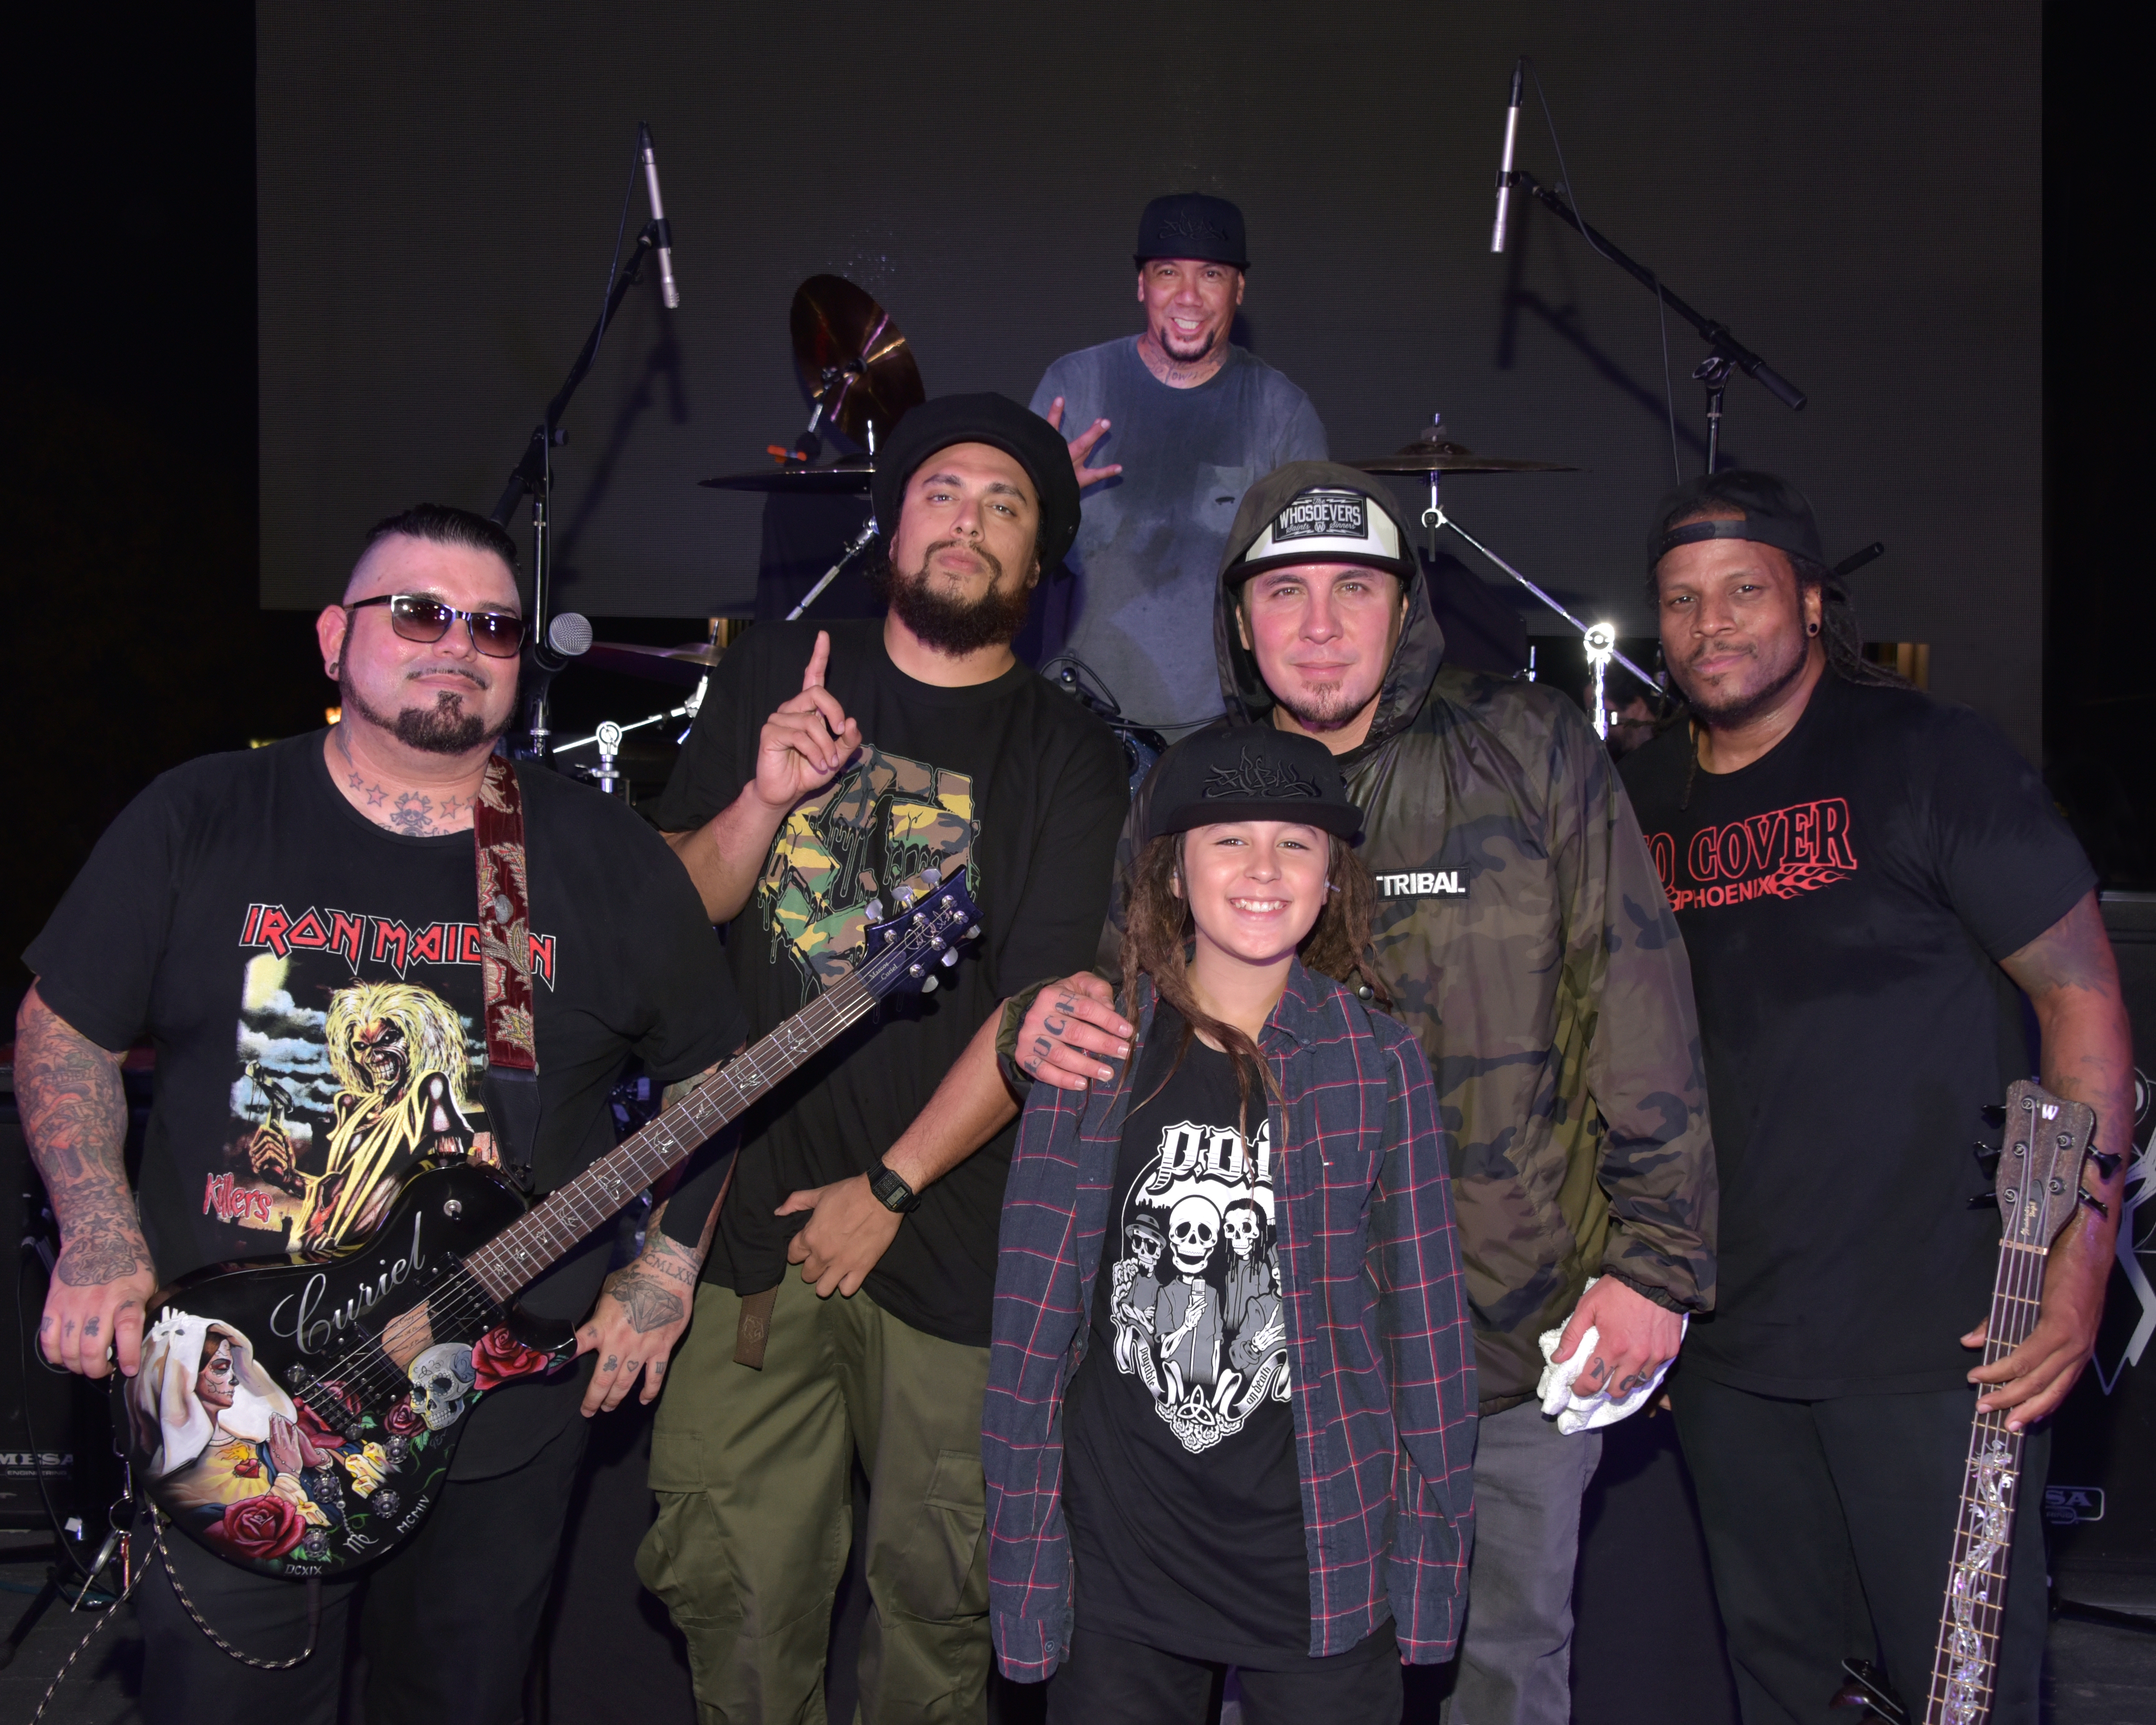 P.O.D Christian Nu Mental Band with a young fan on stage at the Indie Stock Music Festival 2017 - One of the Headliner Bands at Indie Stock Music Festival